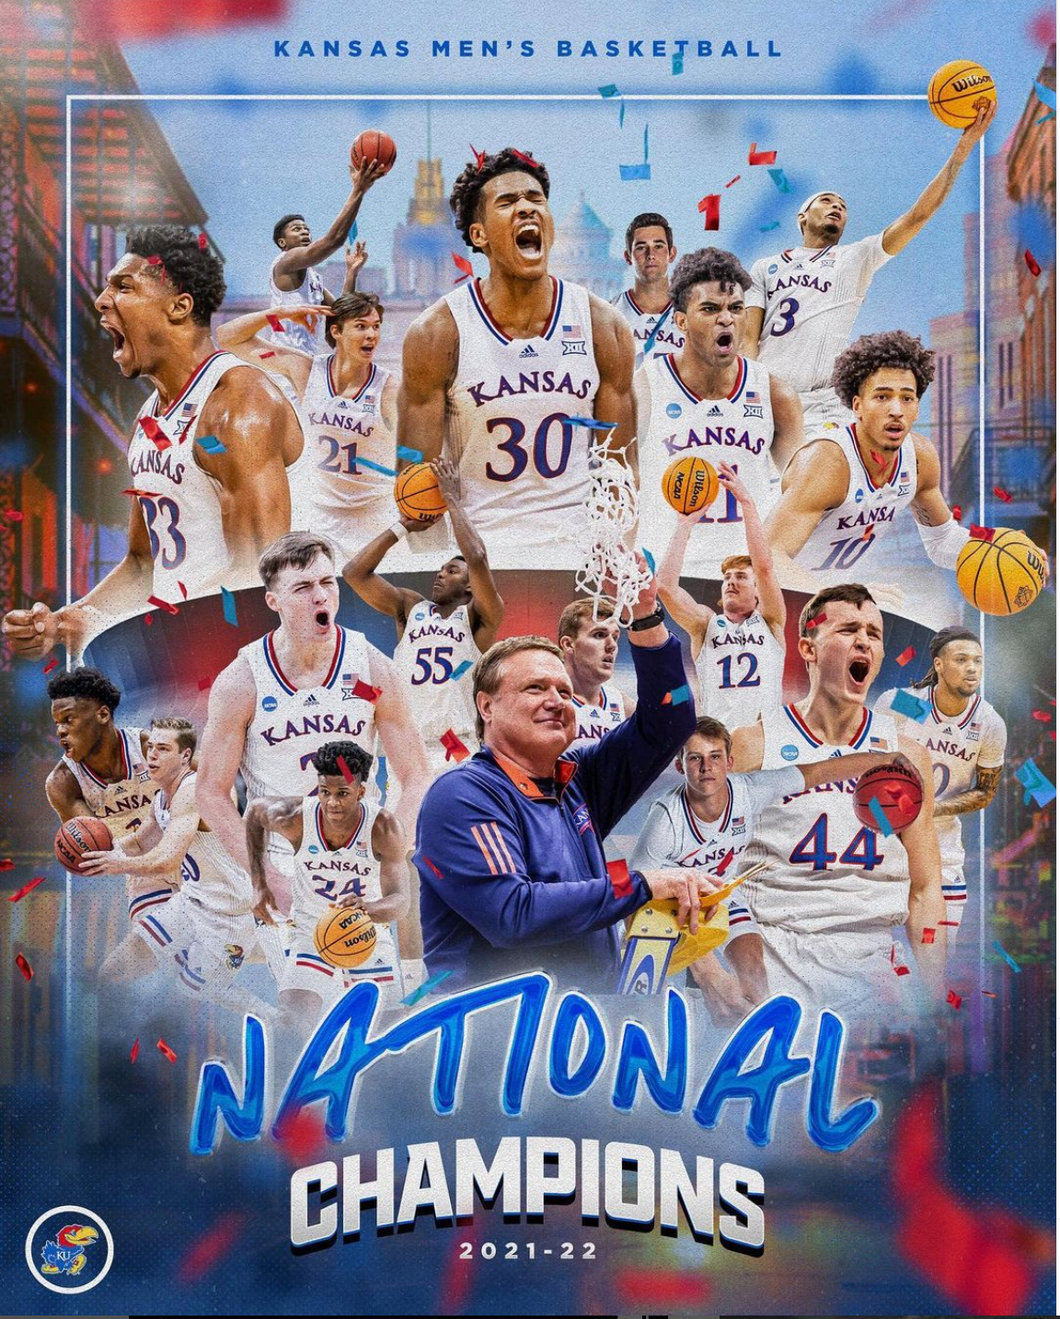 March Madness Finished With Kansas Winning It All